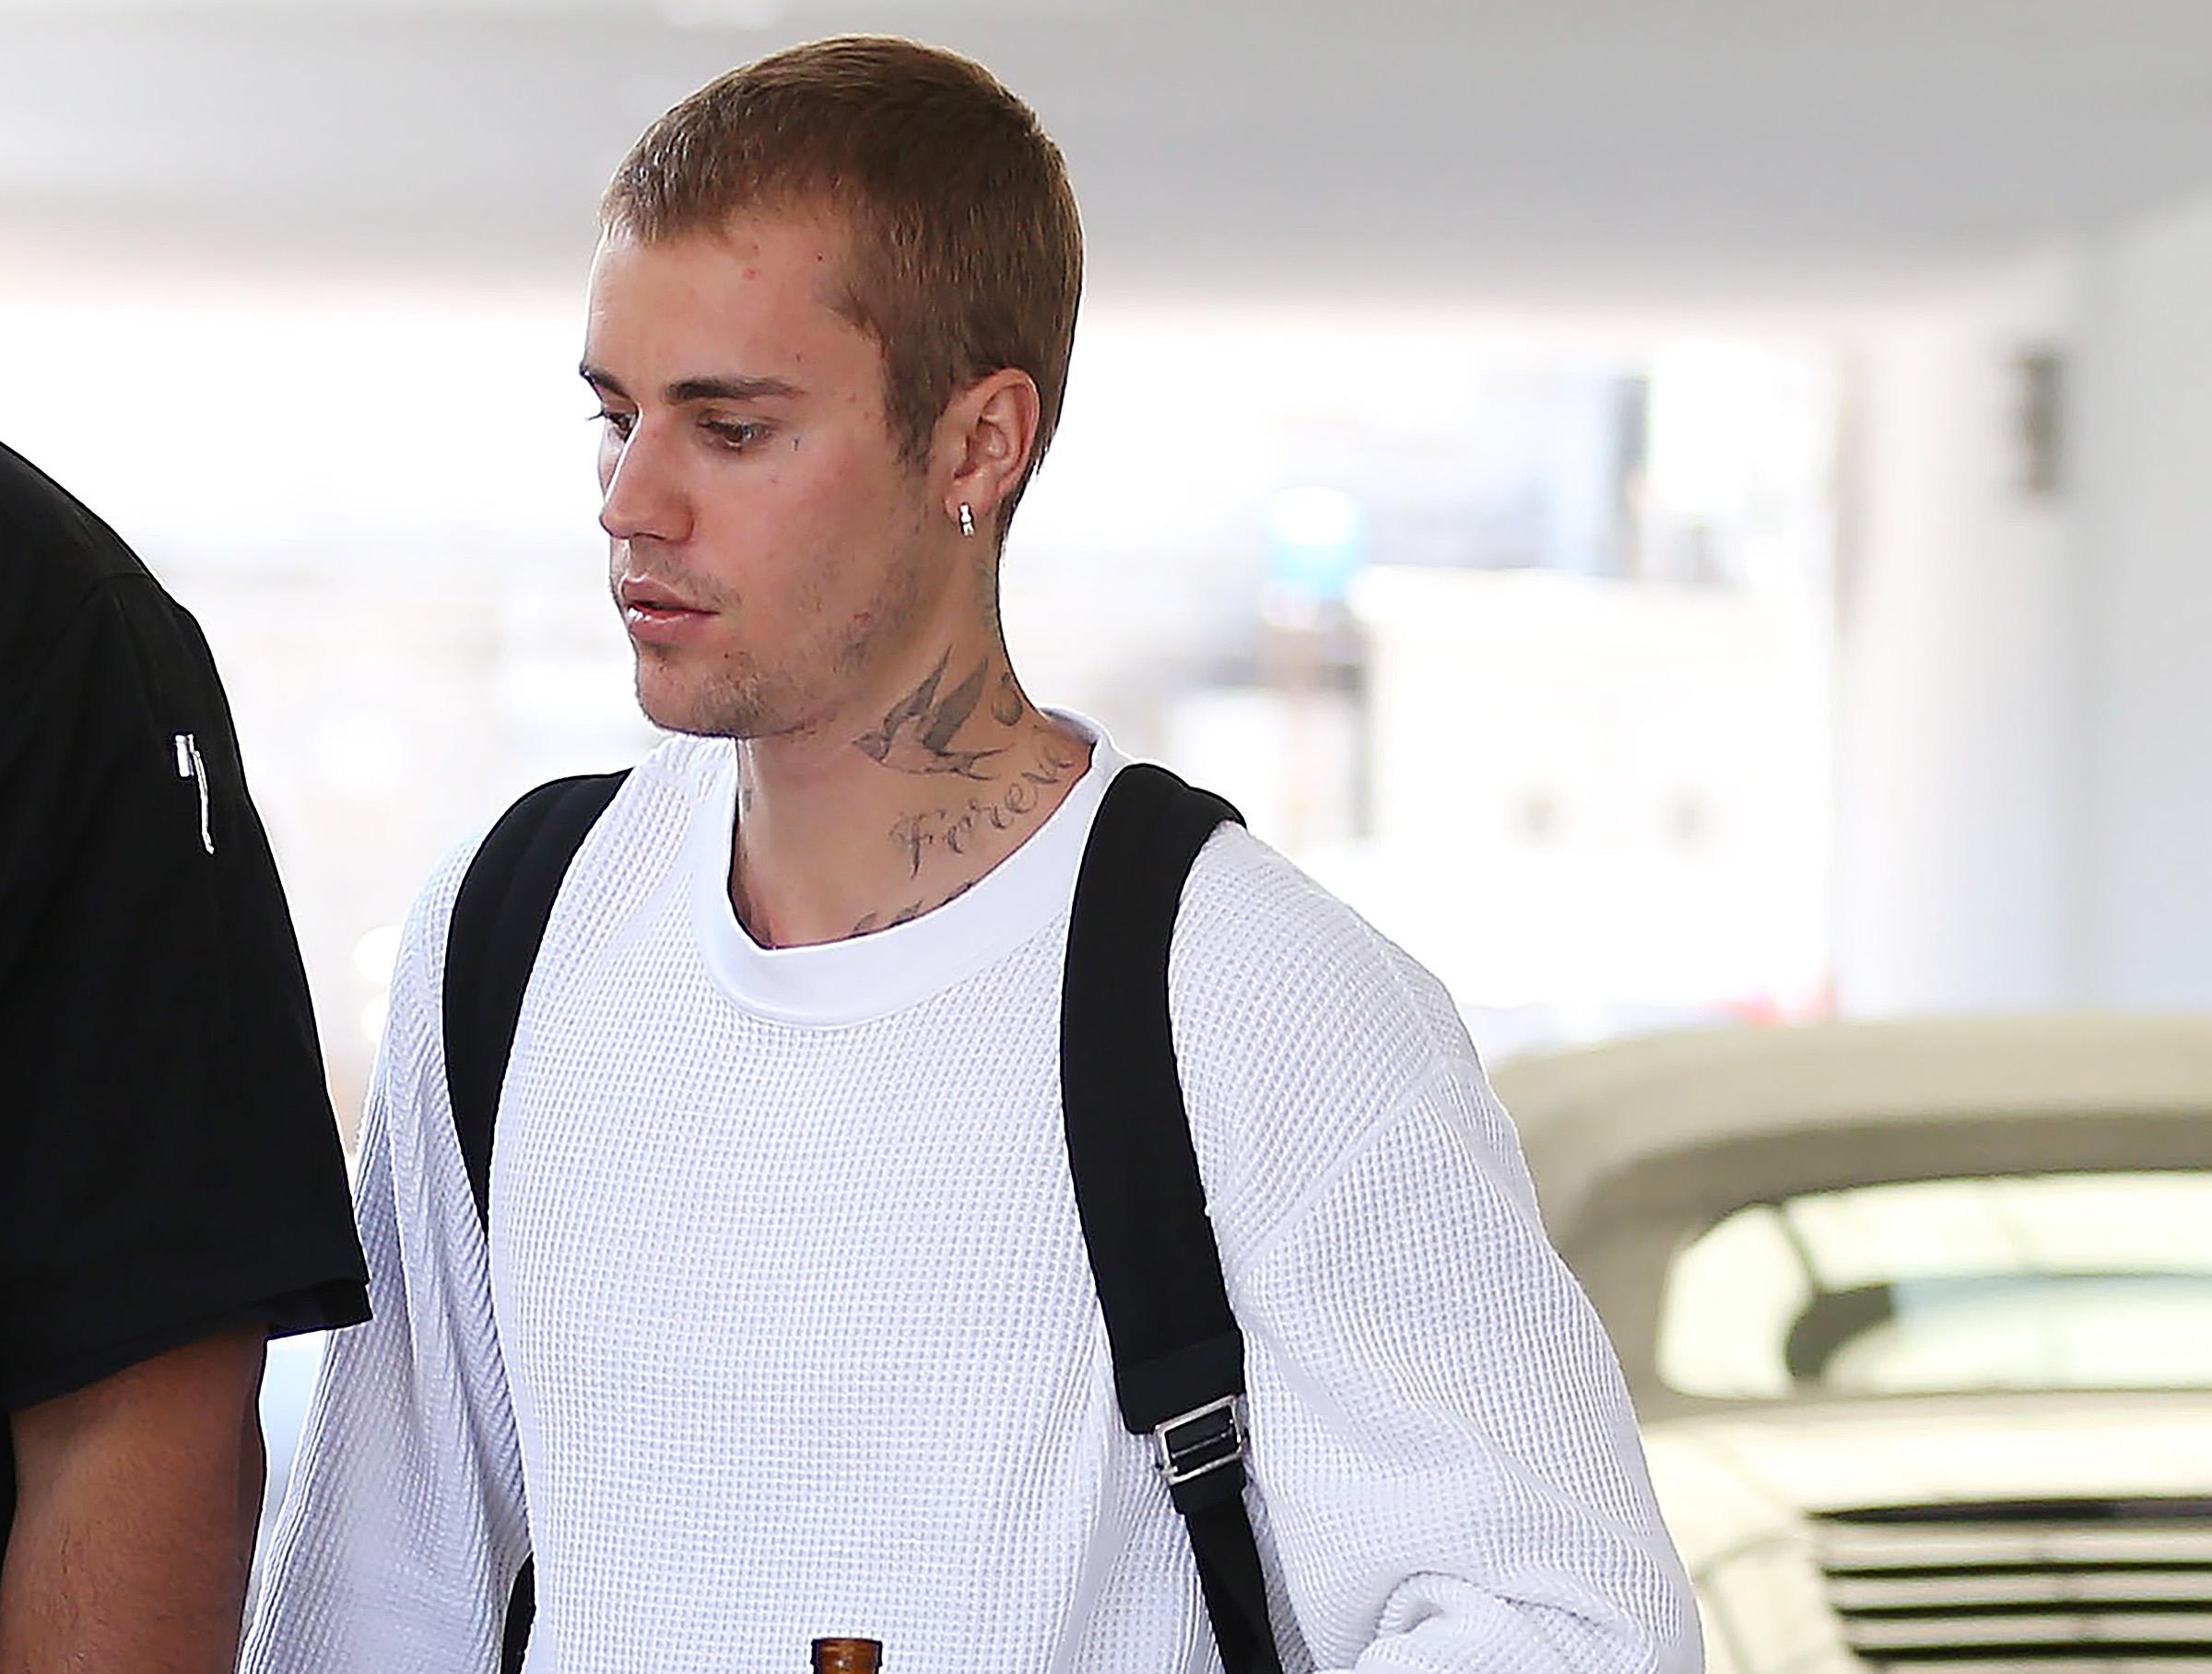 Justin Bieber leaving a Medical building in Beverly Hills